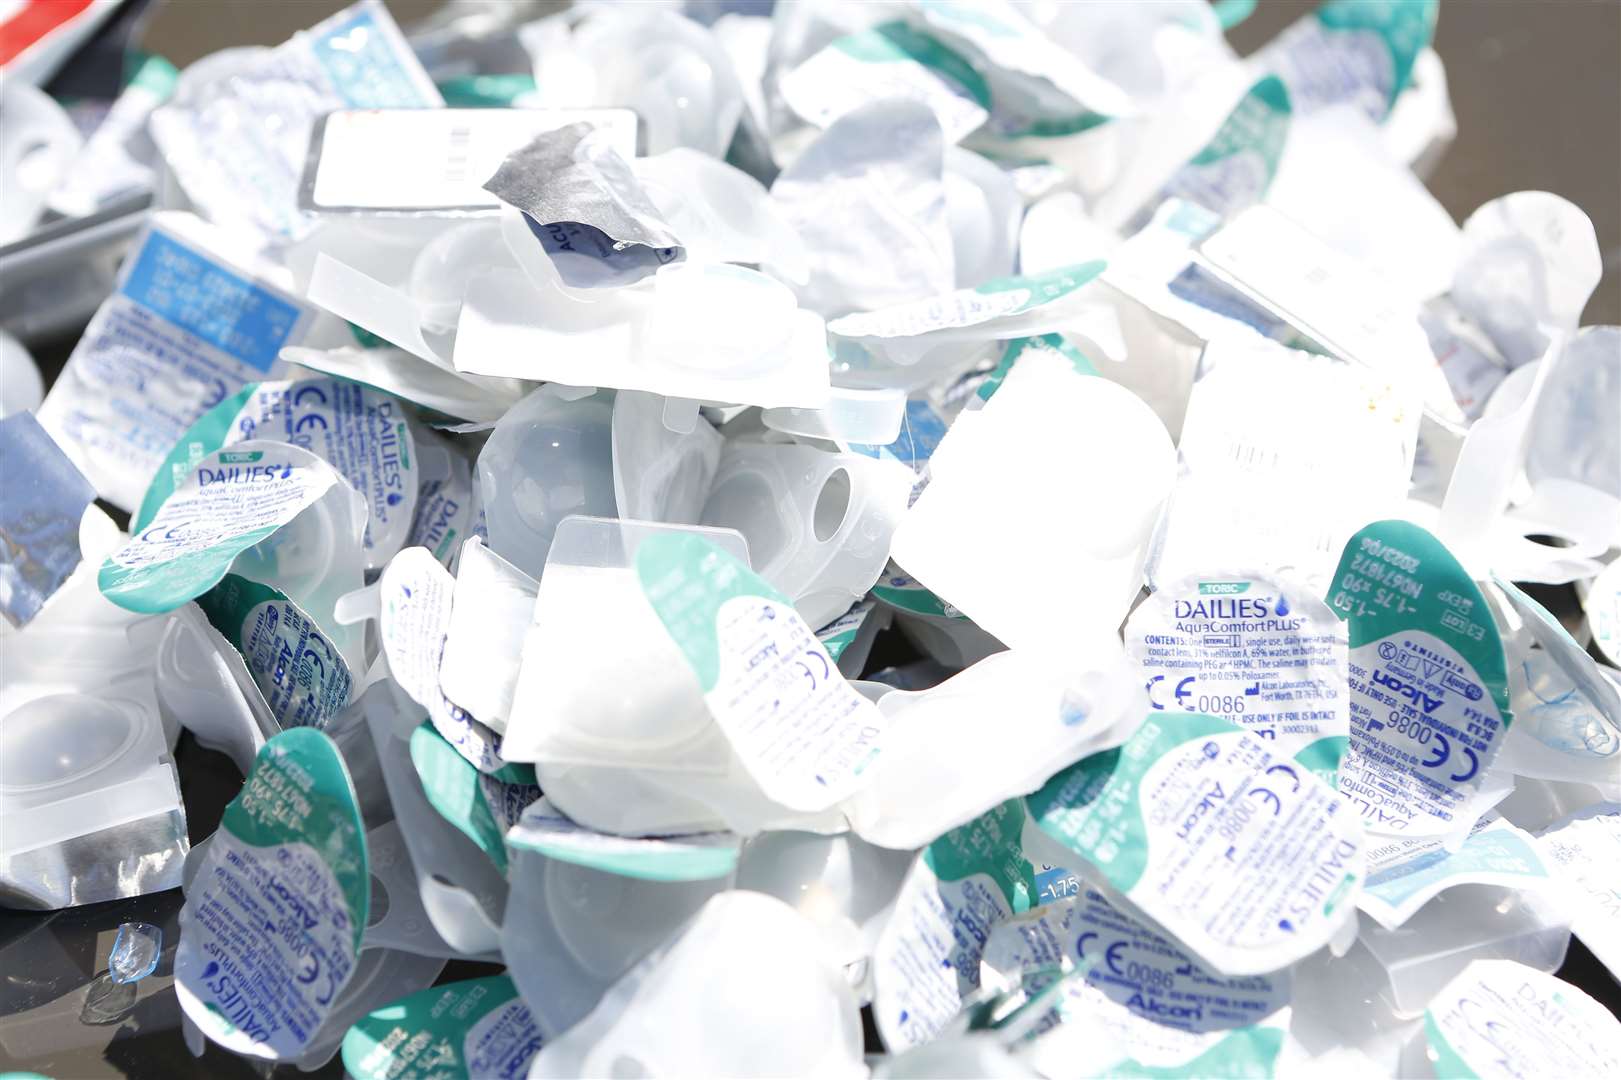 Plastic cartons can be turned into cash